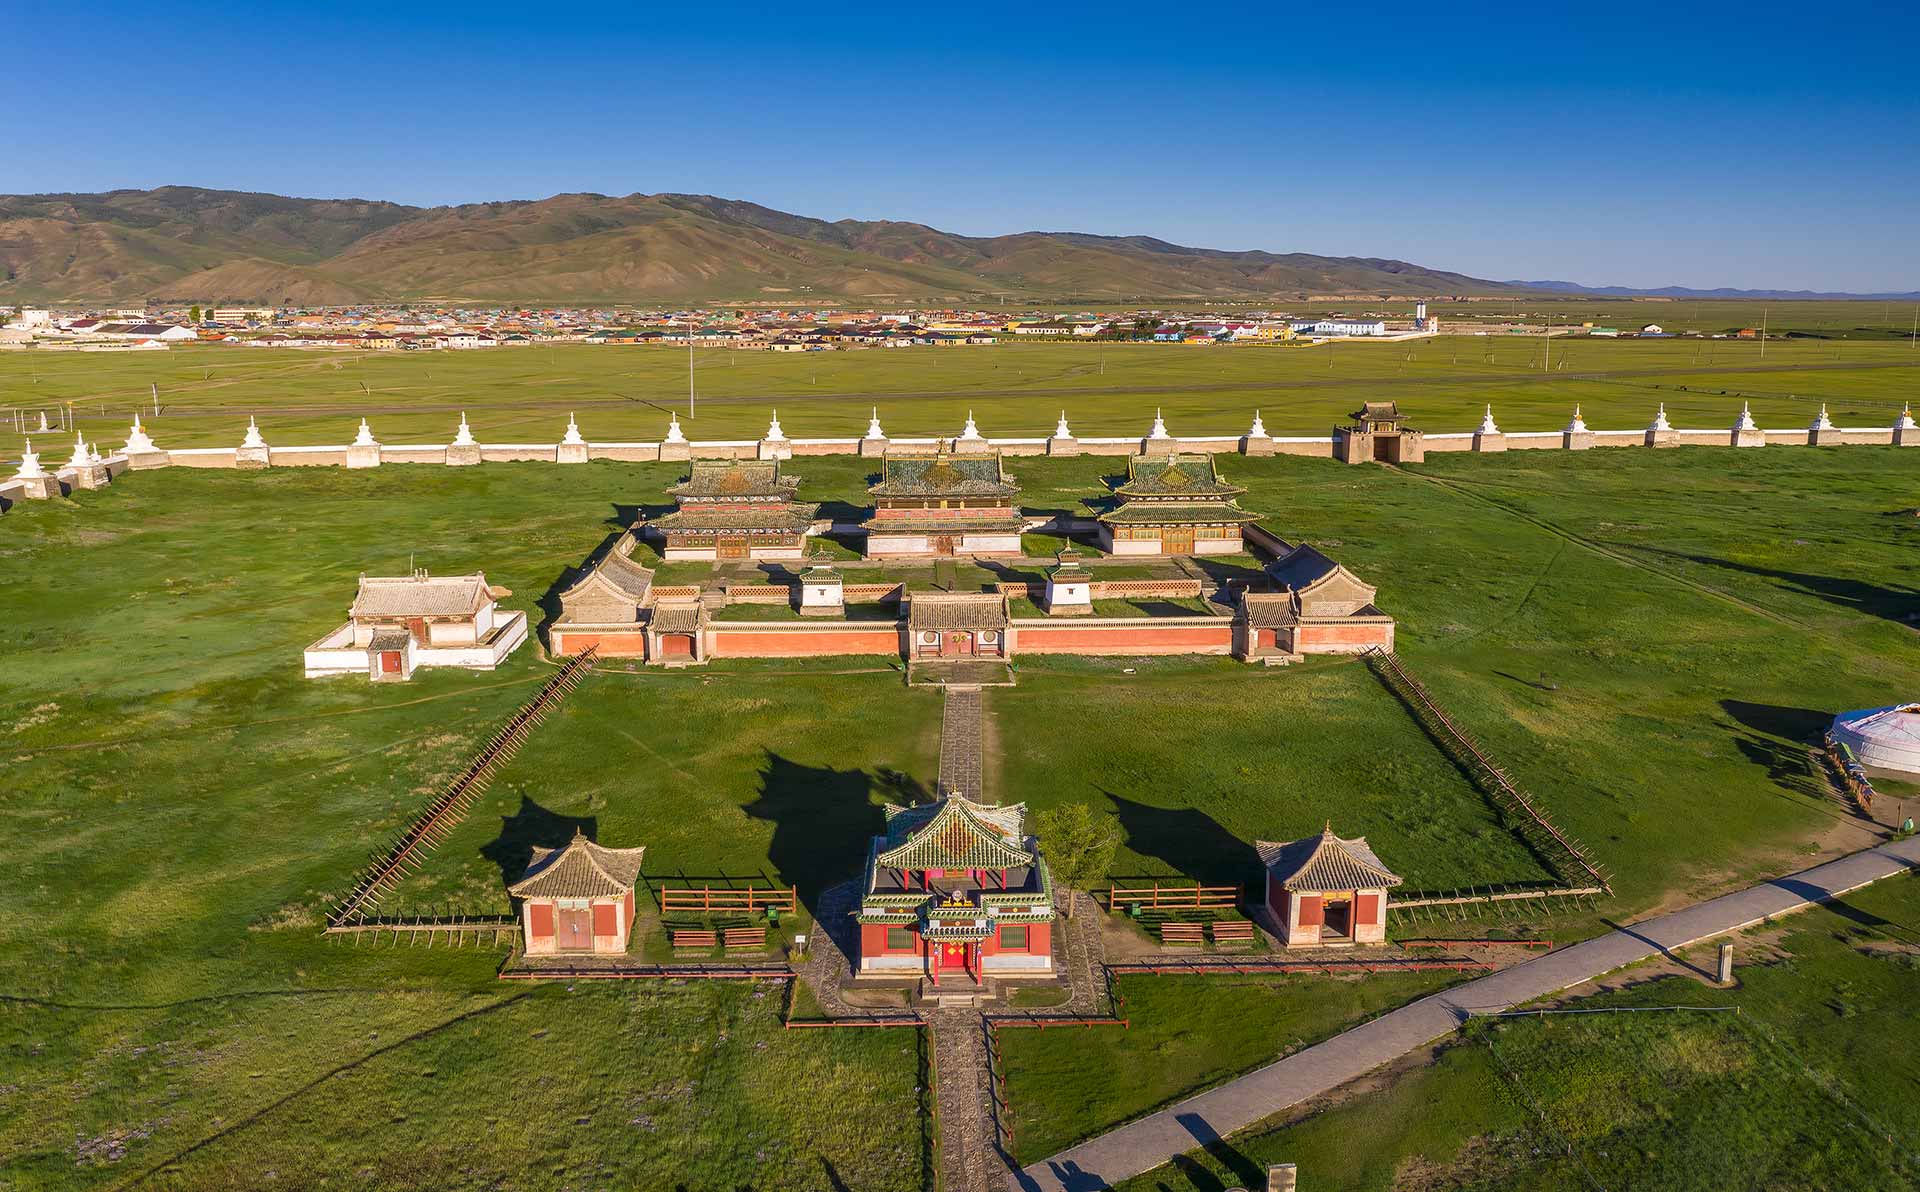 Located in Orkhon Valley, Erdenezuu is the oldest Buddhist temple in Mongolia.